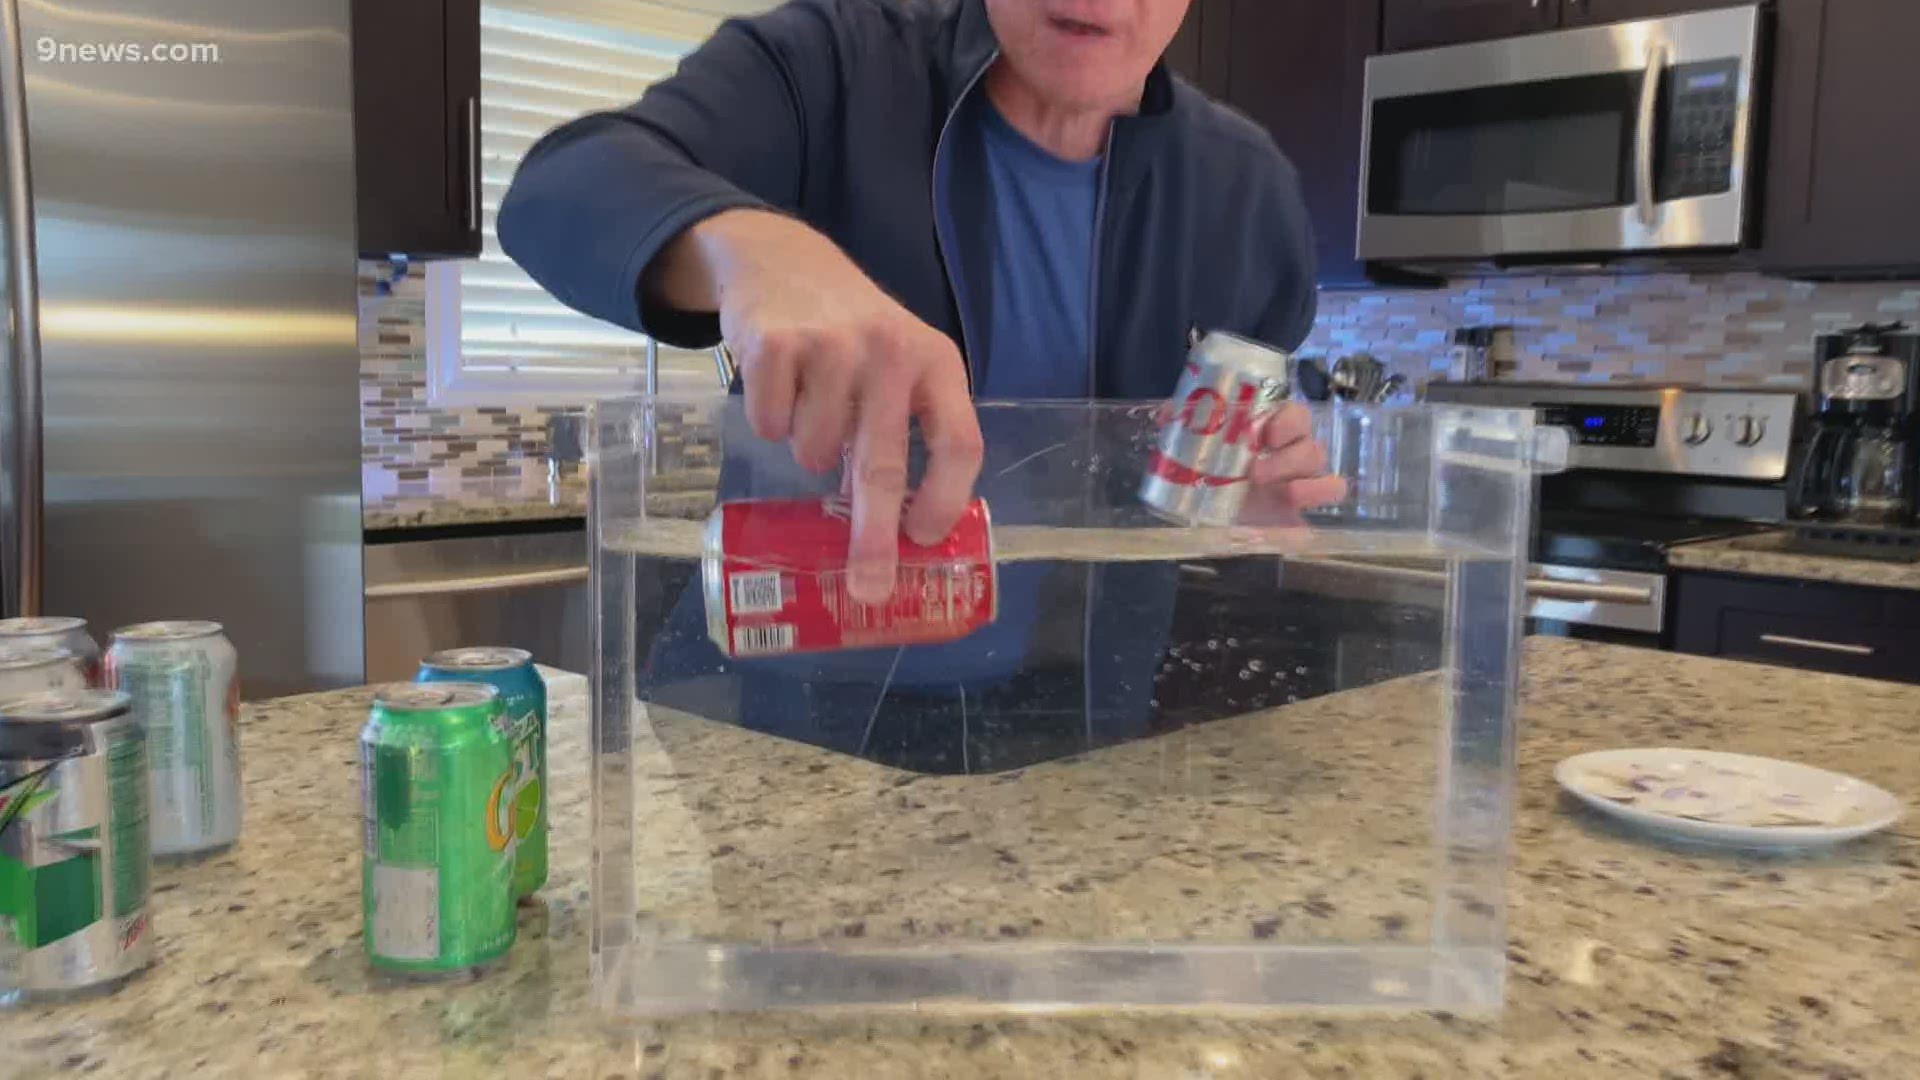 In today's Science Minute, Steve Spangler shares a simple experiment you can try at home to show the differences in your soda.